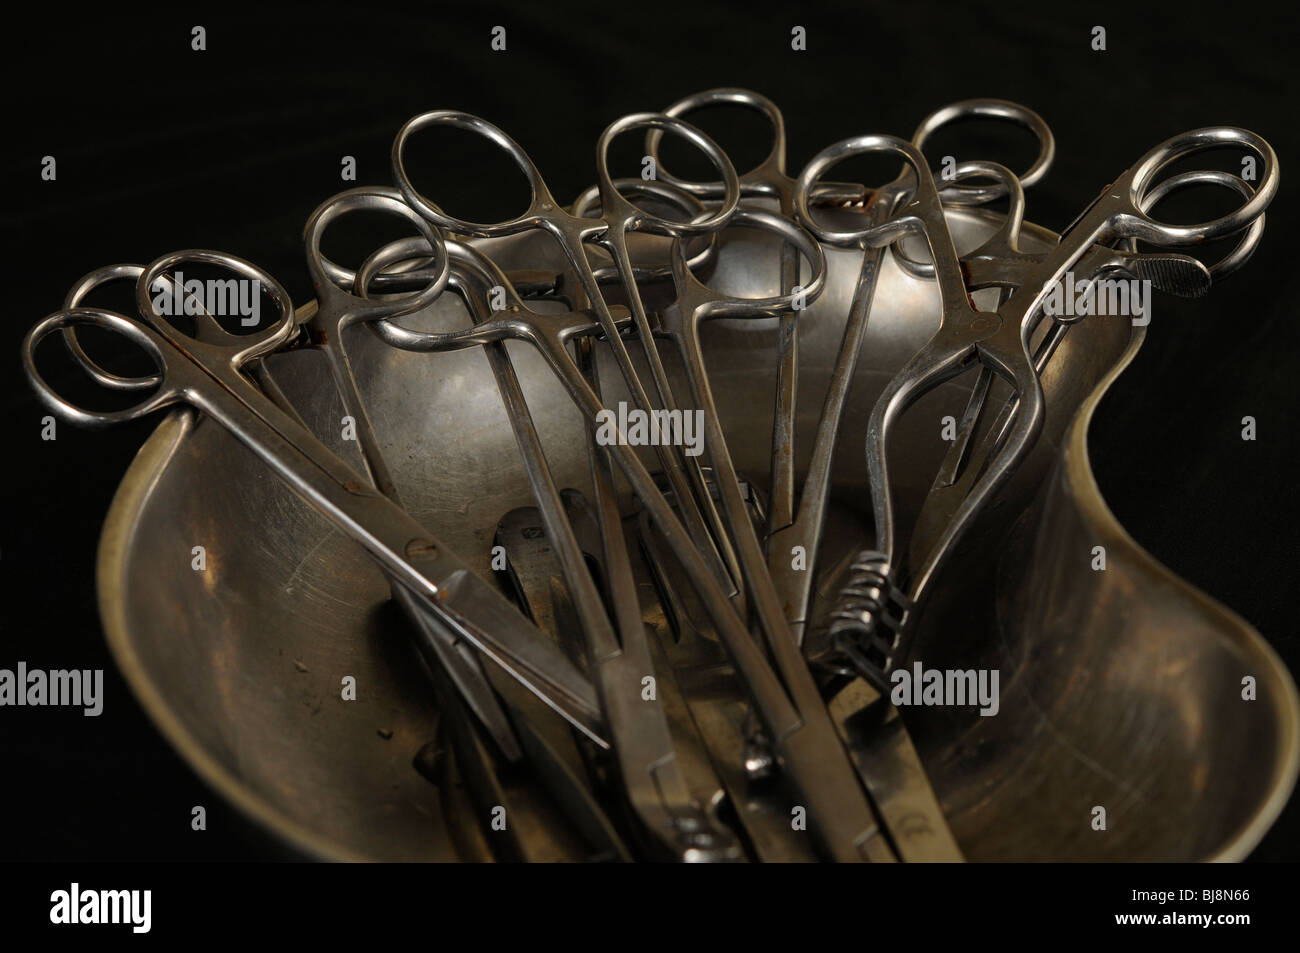 Stainless steel medical instruments laid out in a kidney dish used for embalming Stock Photo